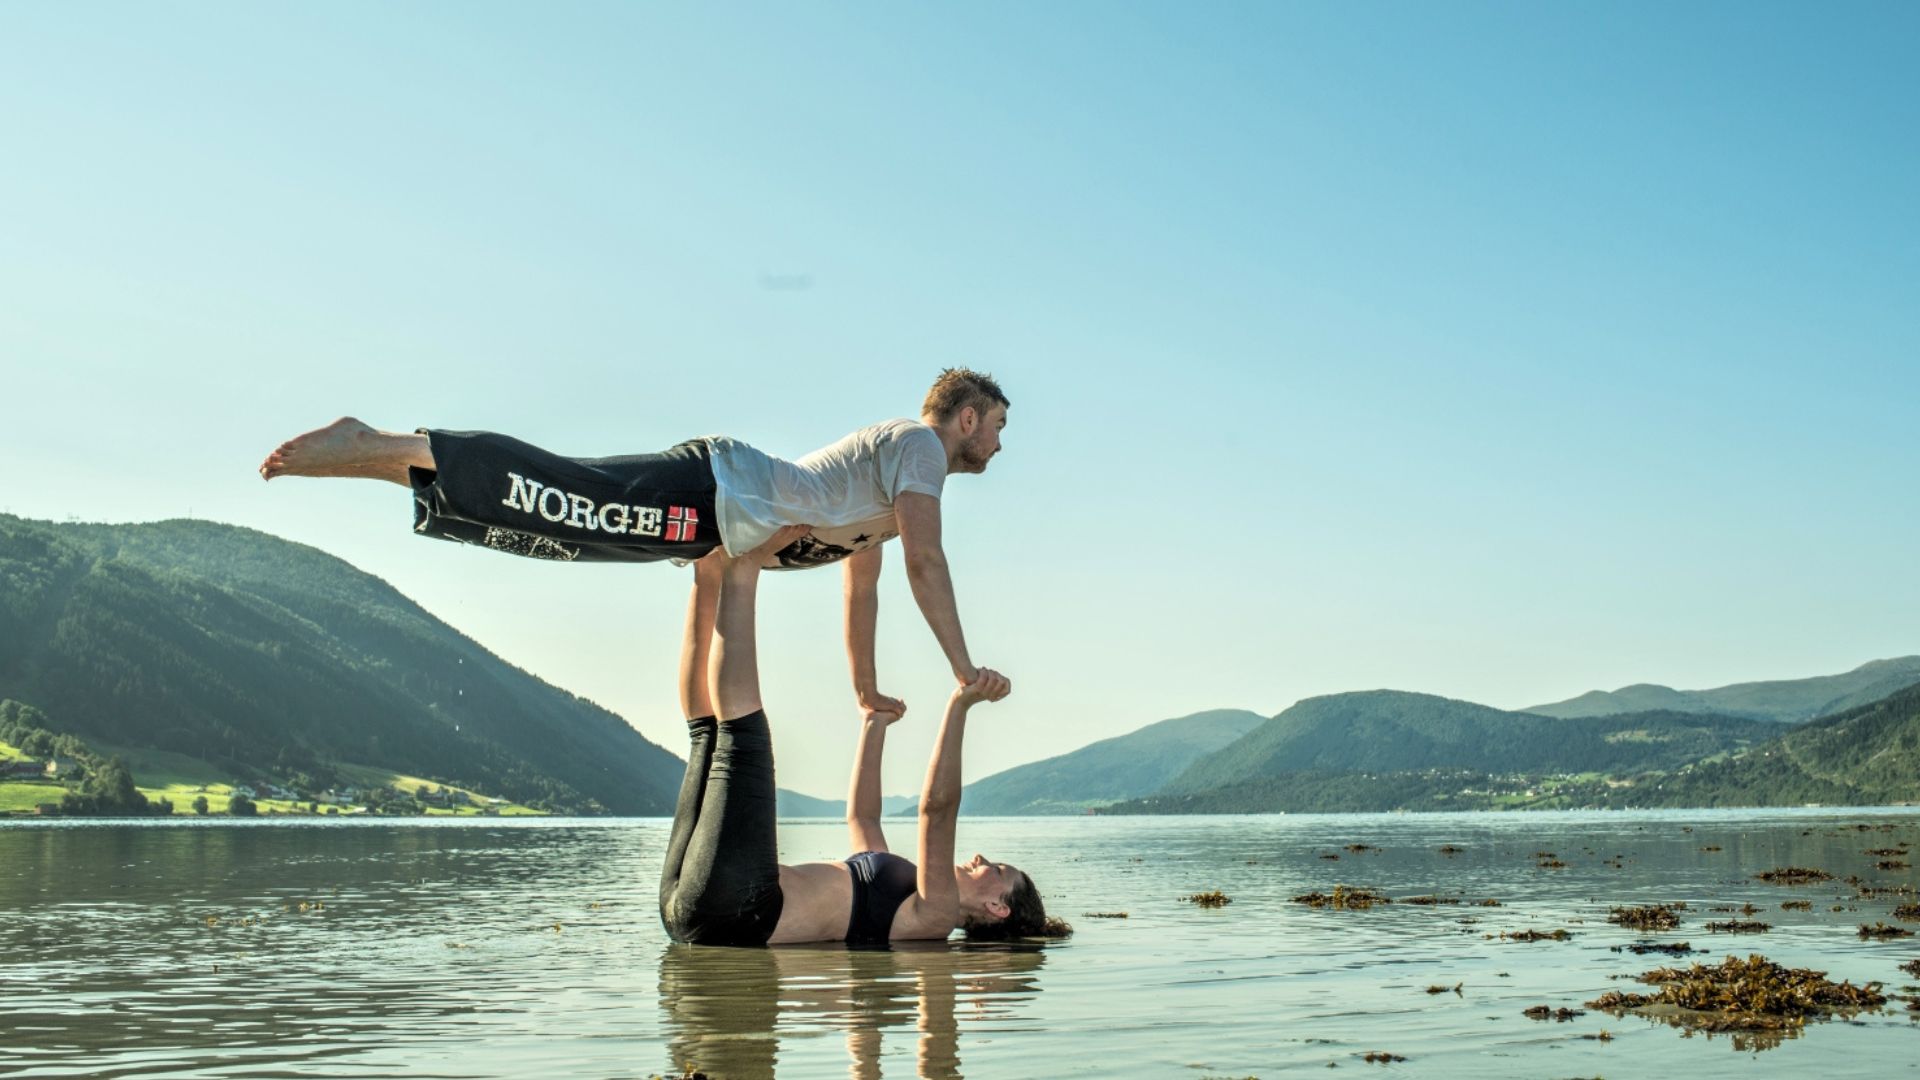 In Stad, Norway, Fjordane Folkehøgskule Gives Young Adults A Line To Circus